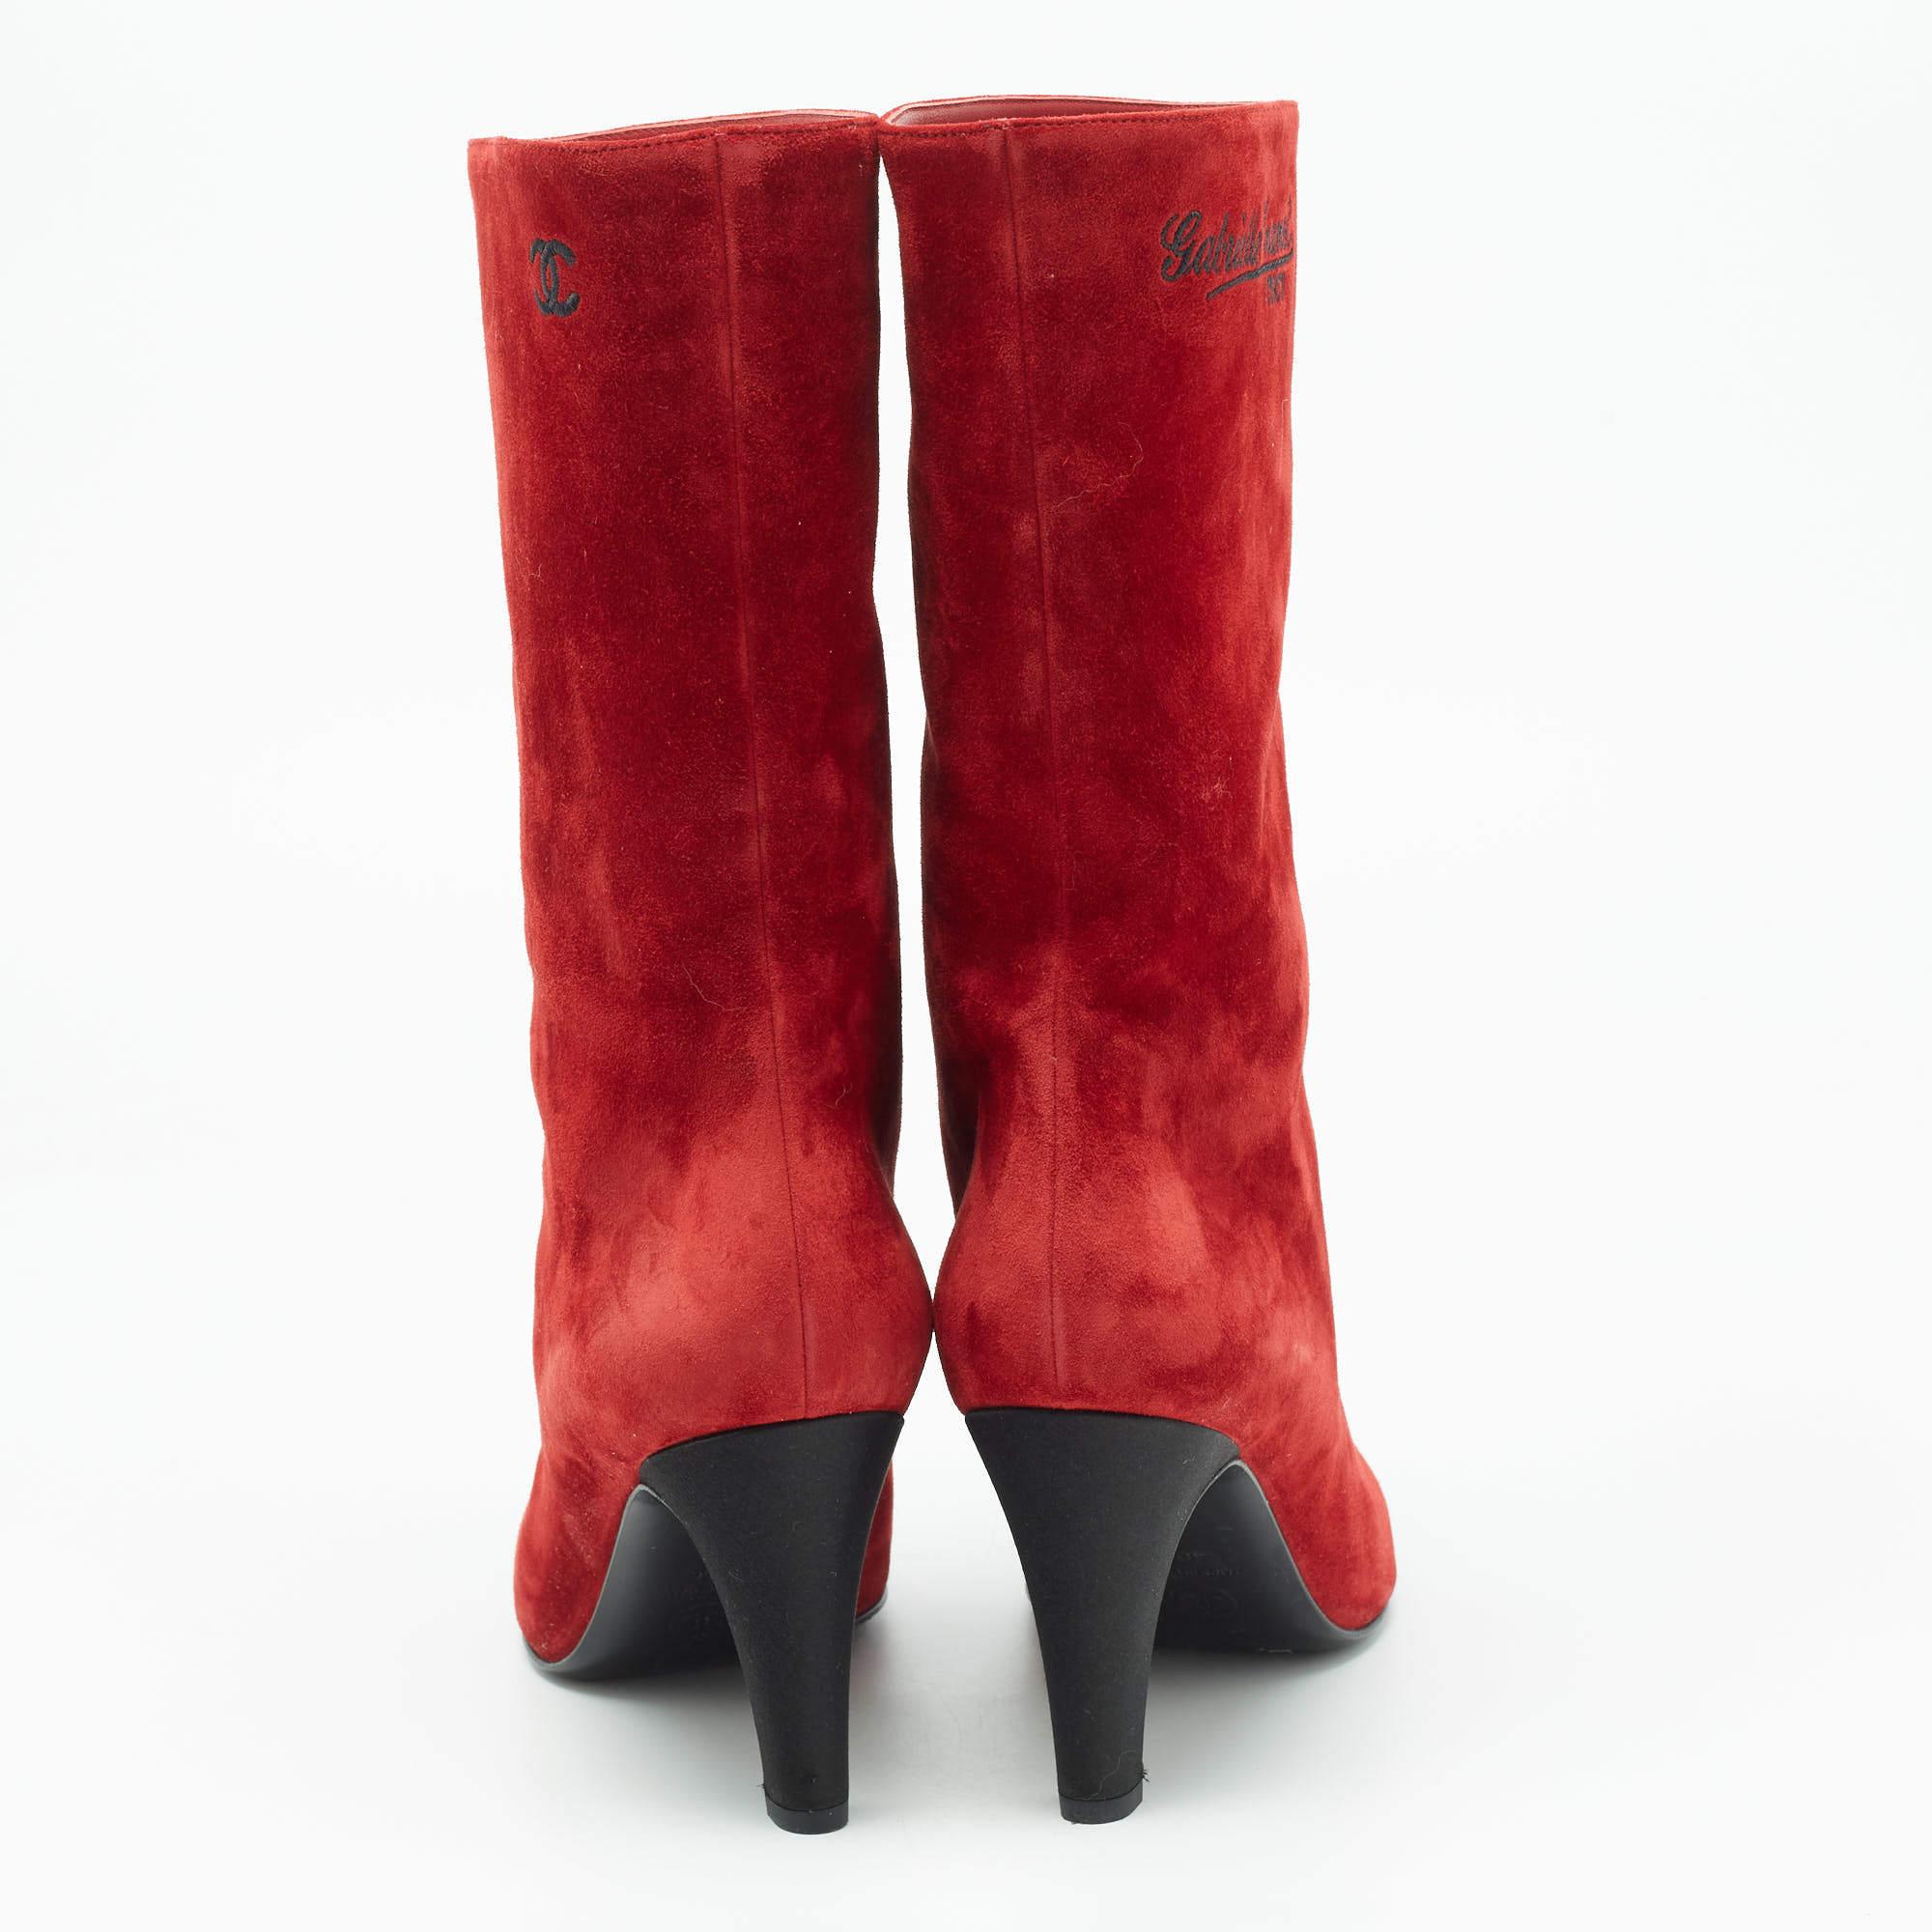 Chanel Red/Black Suede Pointed Toe Mid Calf Boots Size 40 3